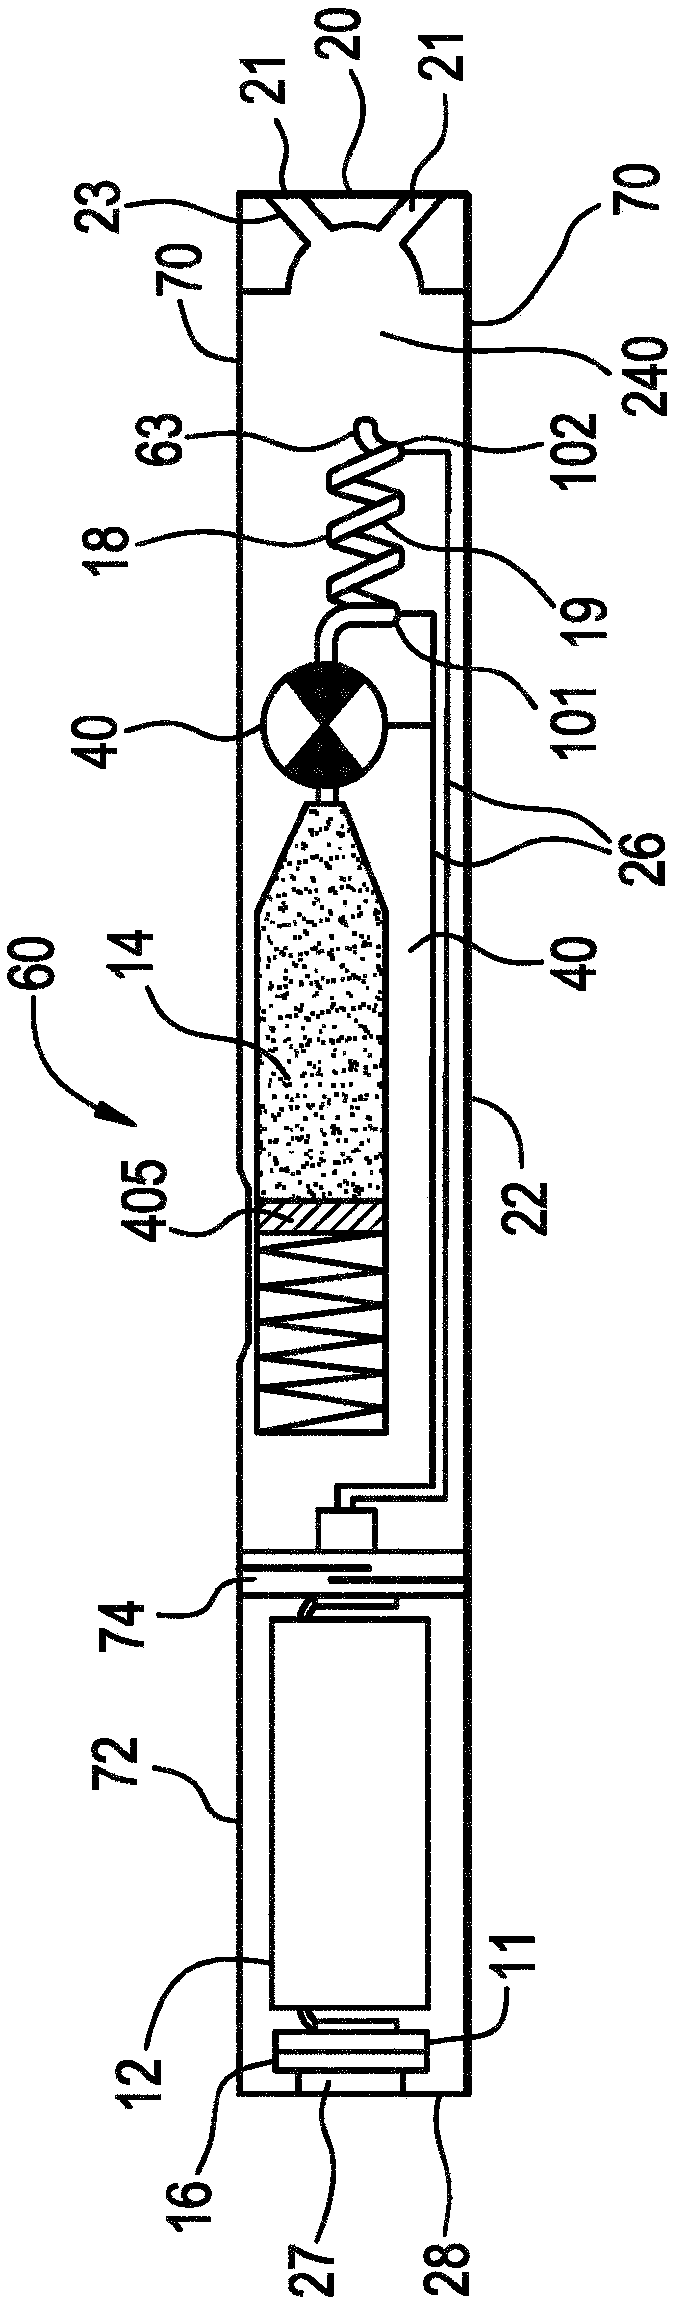 Strength enhancers and method of achieving strength enhancement in an electronic vapor device